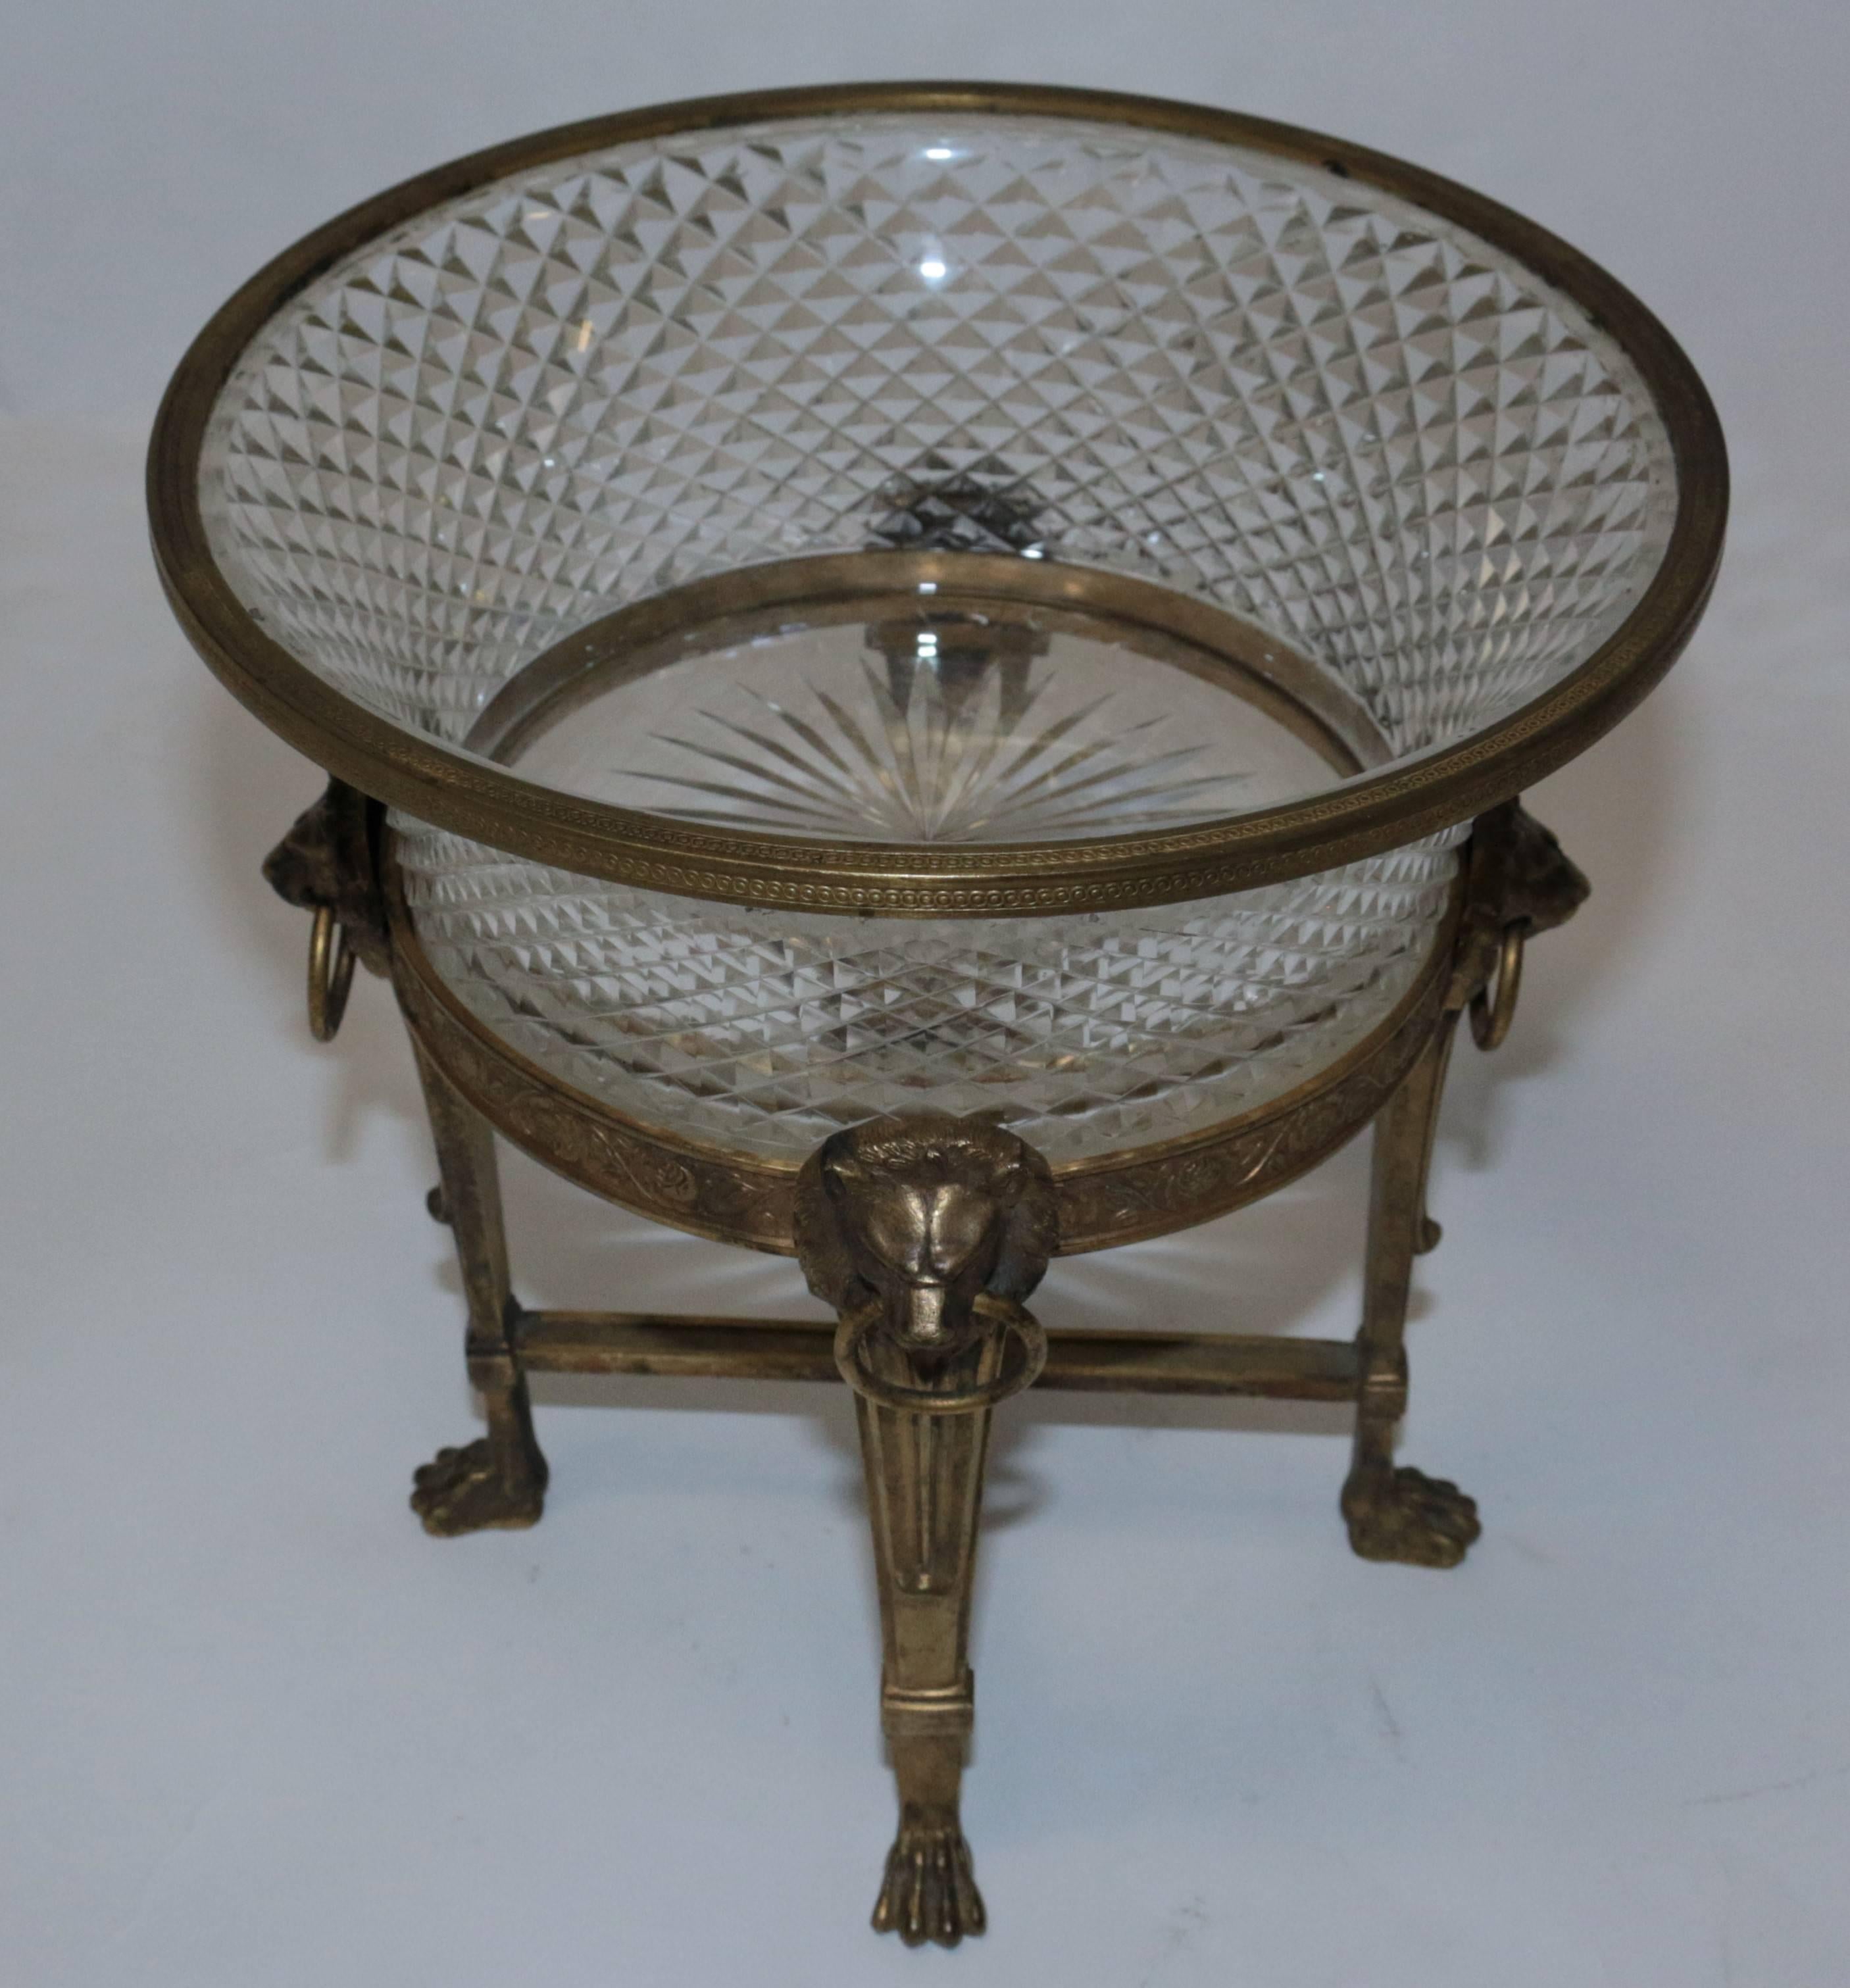 A wonderful 19th century antique French doré that has diamond cut crystal with gilt bronze ormolu frame. There are four lion heads around the center bronze rim of the centerpiece holding circular bronze rings.